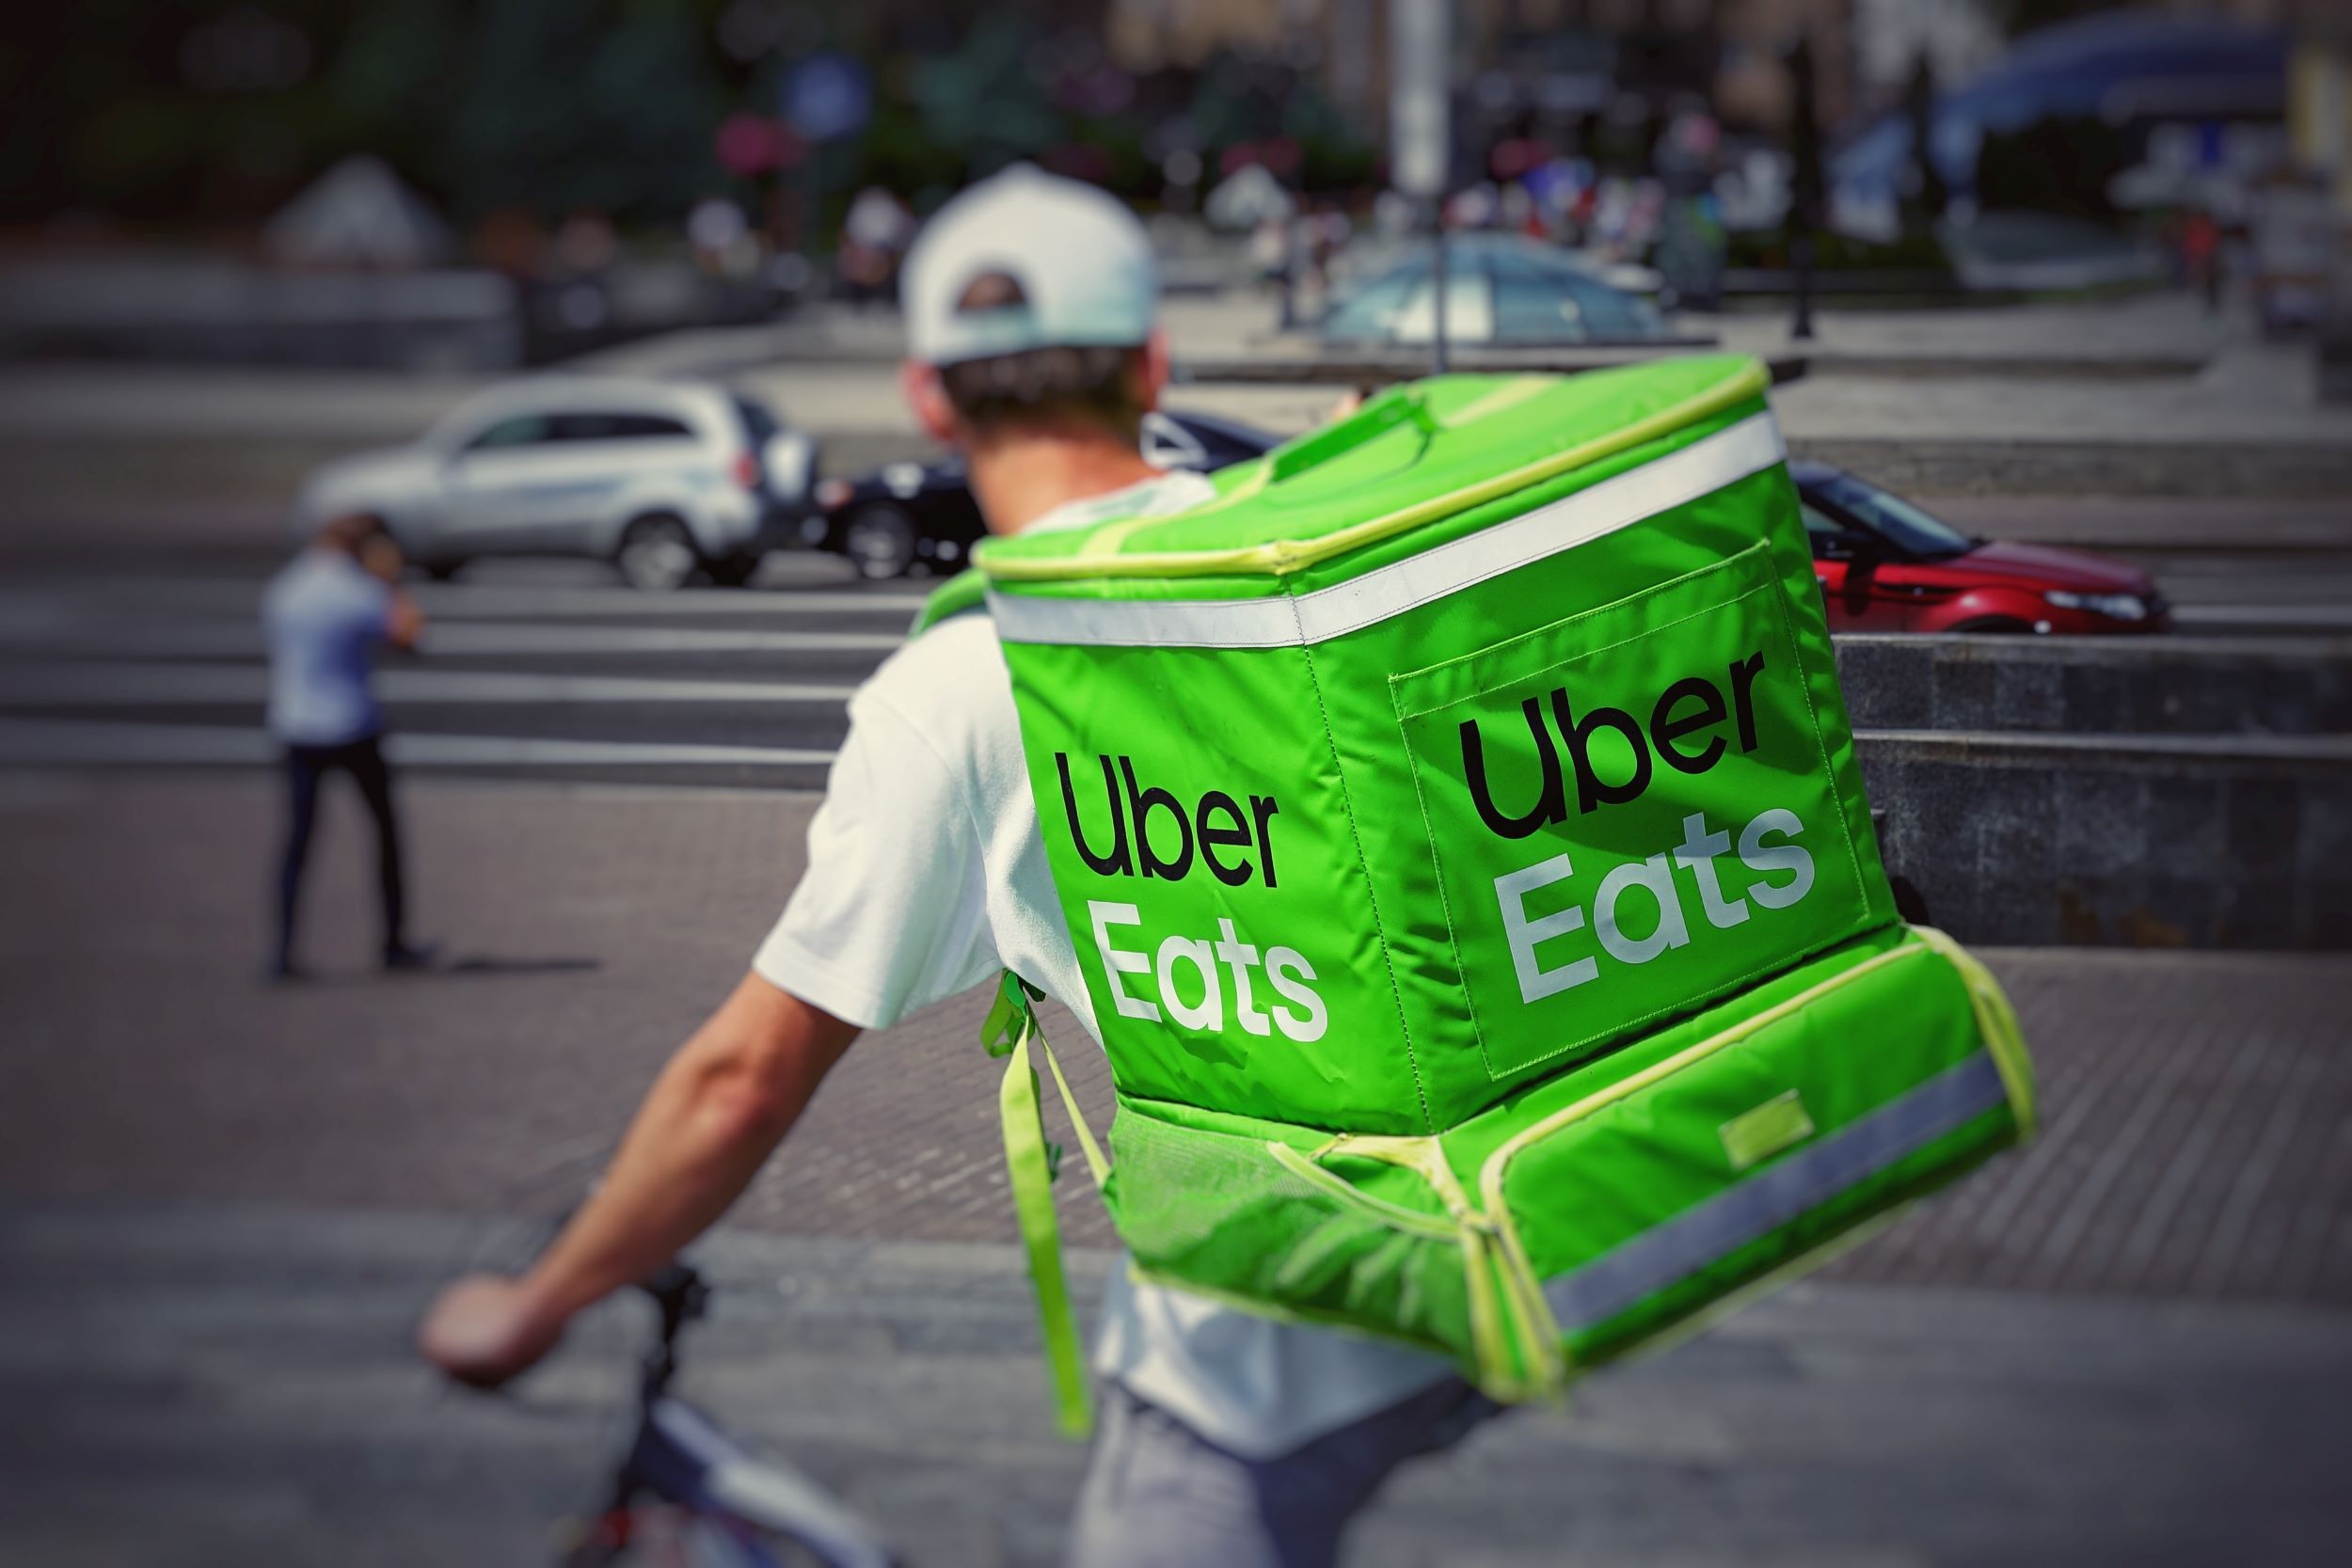 An image of an Uber Eats food courier.